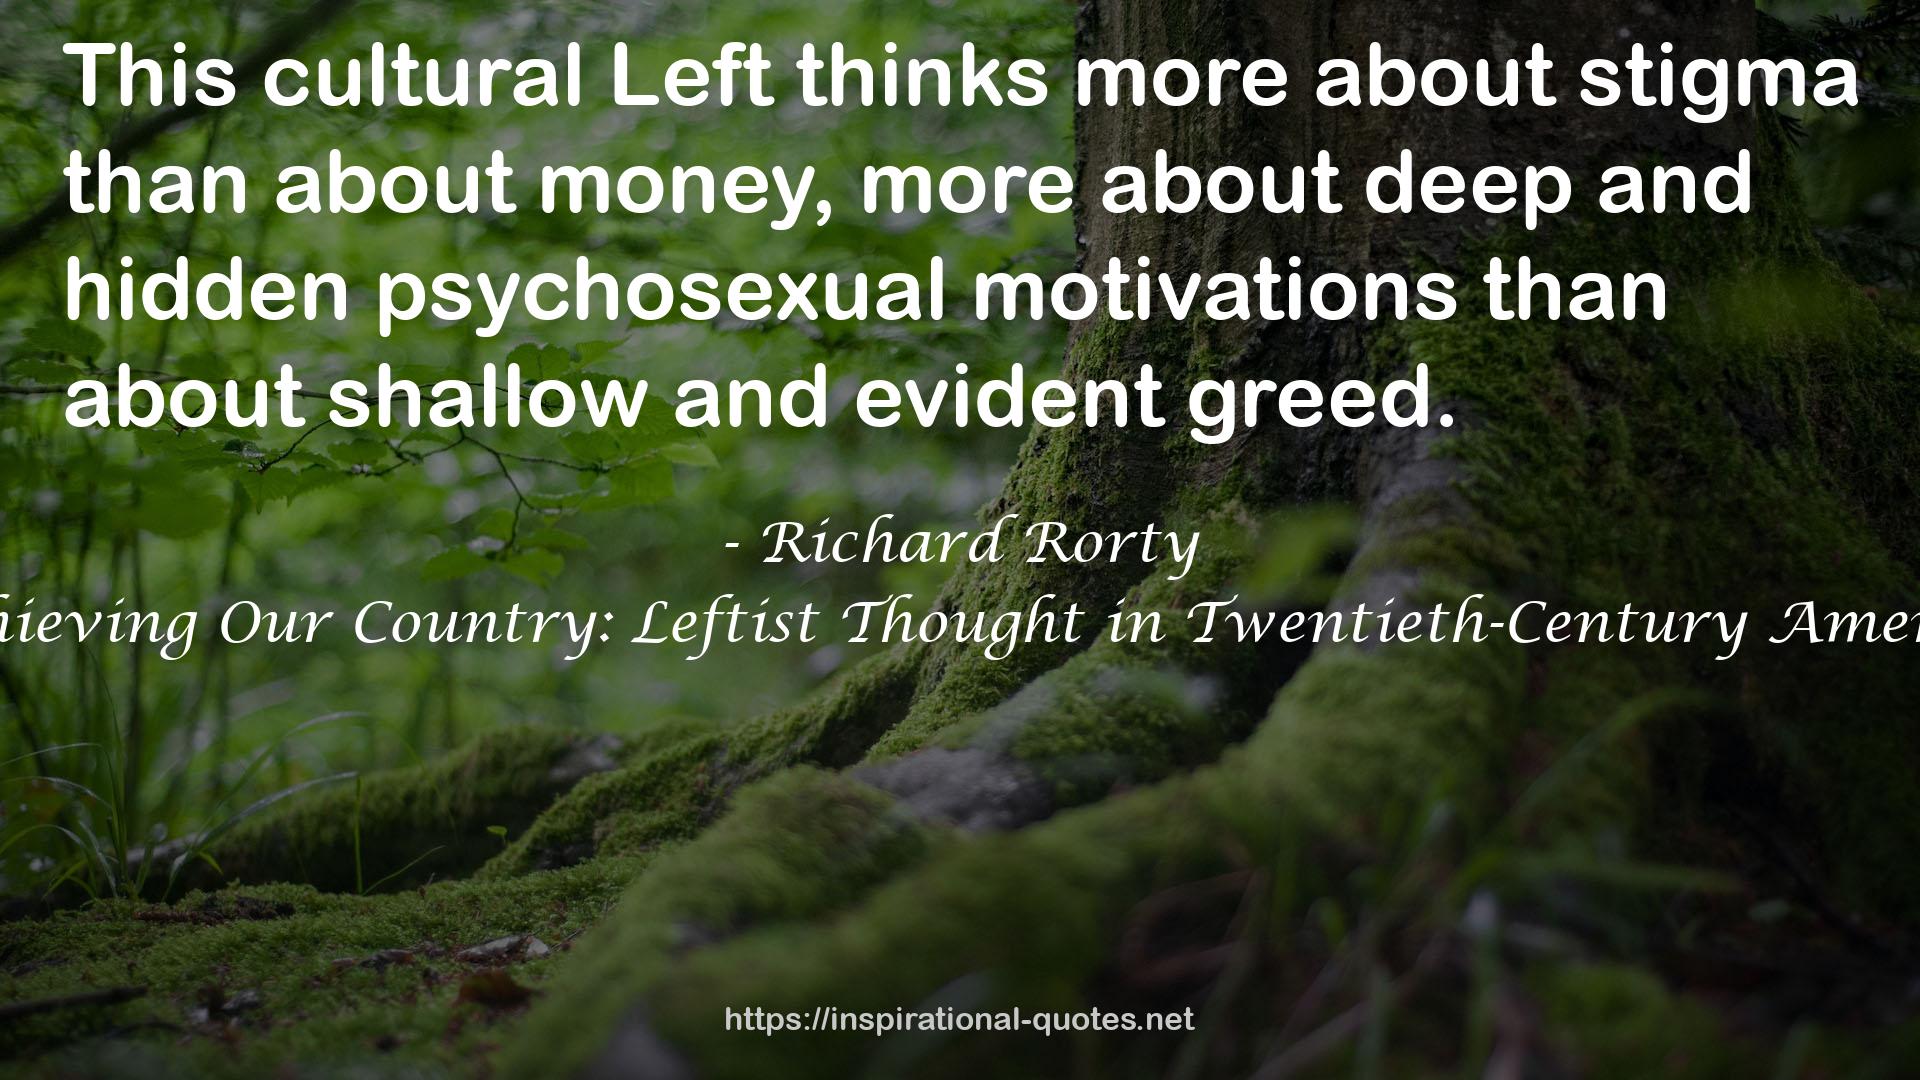 Achieving Our Country: Leftist Thought in Twentieth-Century America QUOTES